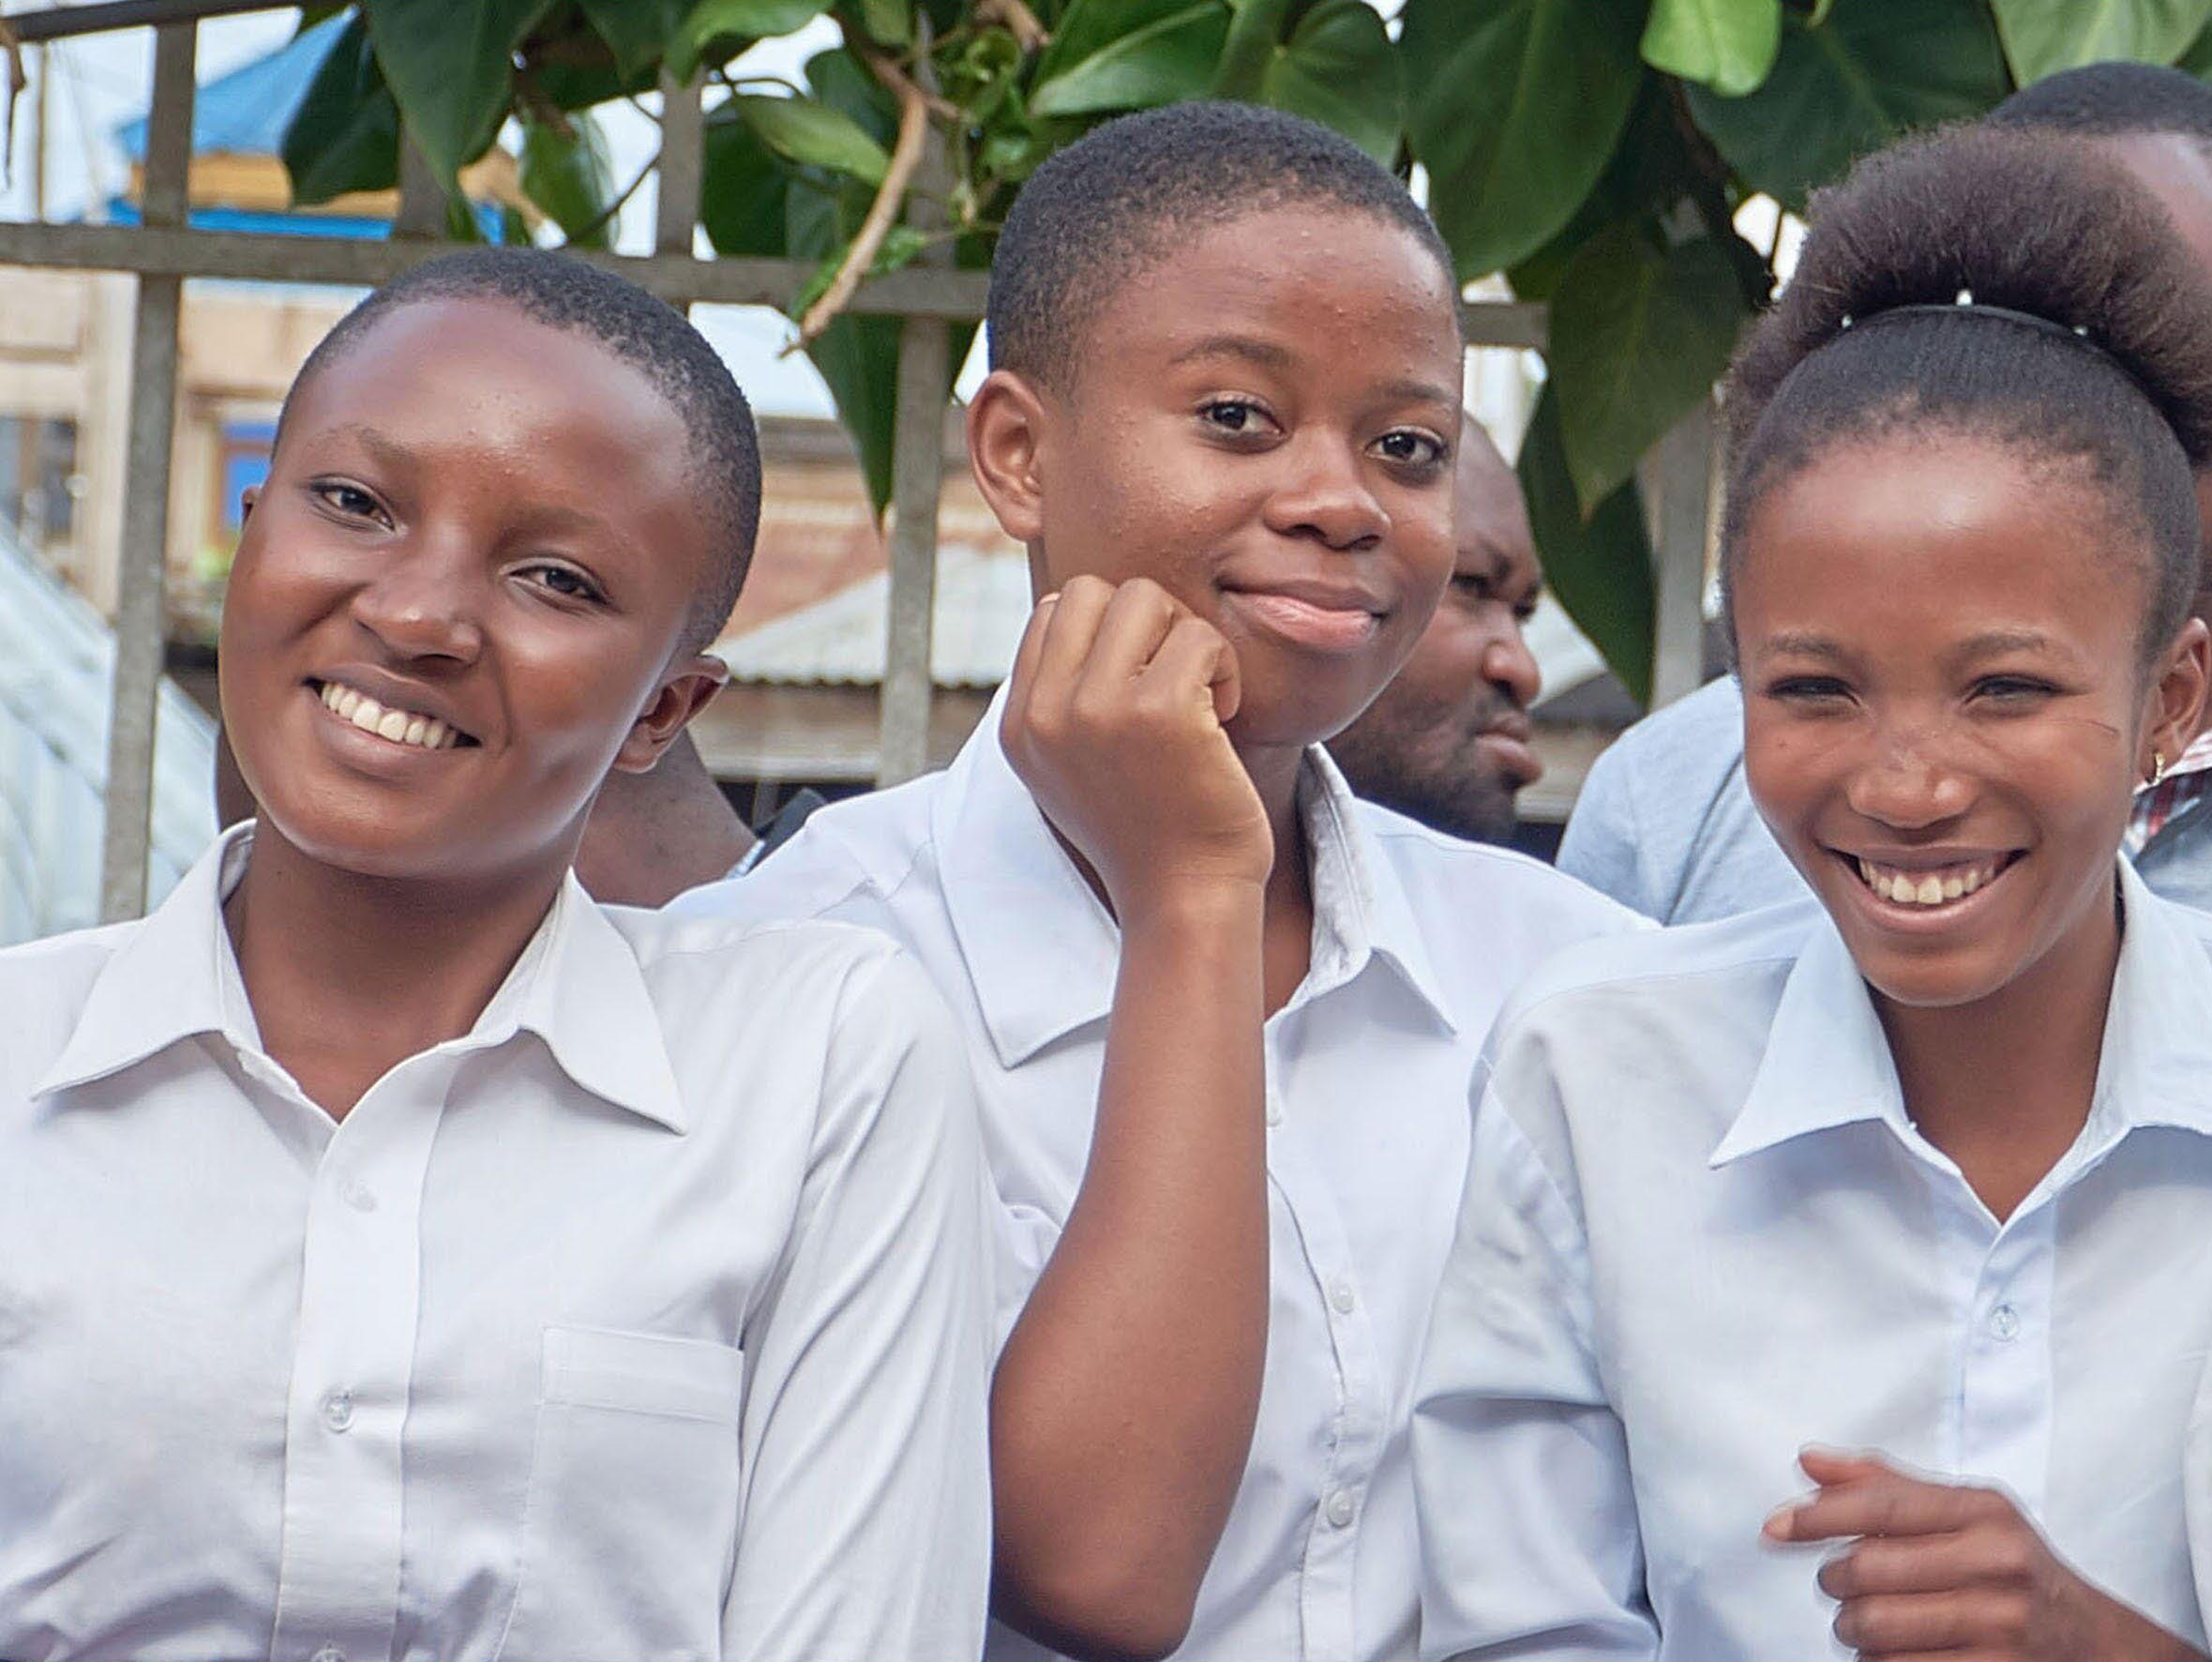 our story Schoolgirls lead initiatives to end gender-based violence in the Democratic Republic of Congo image